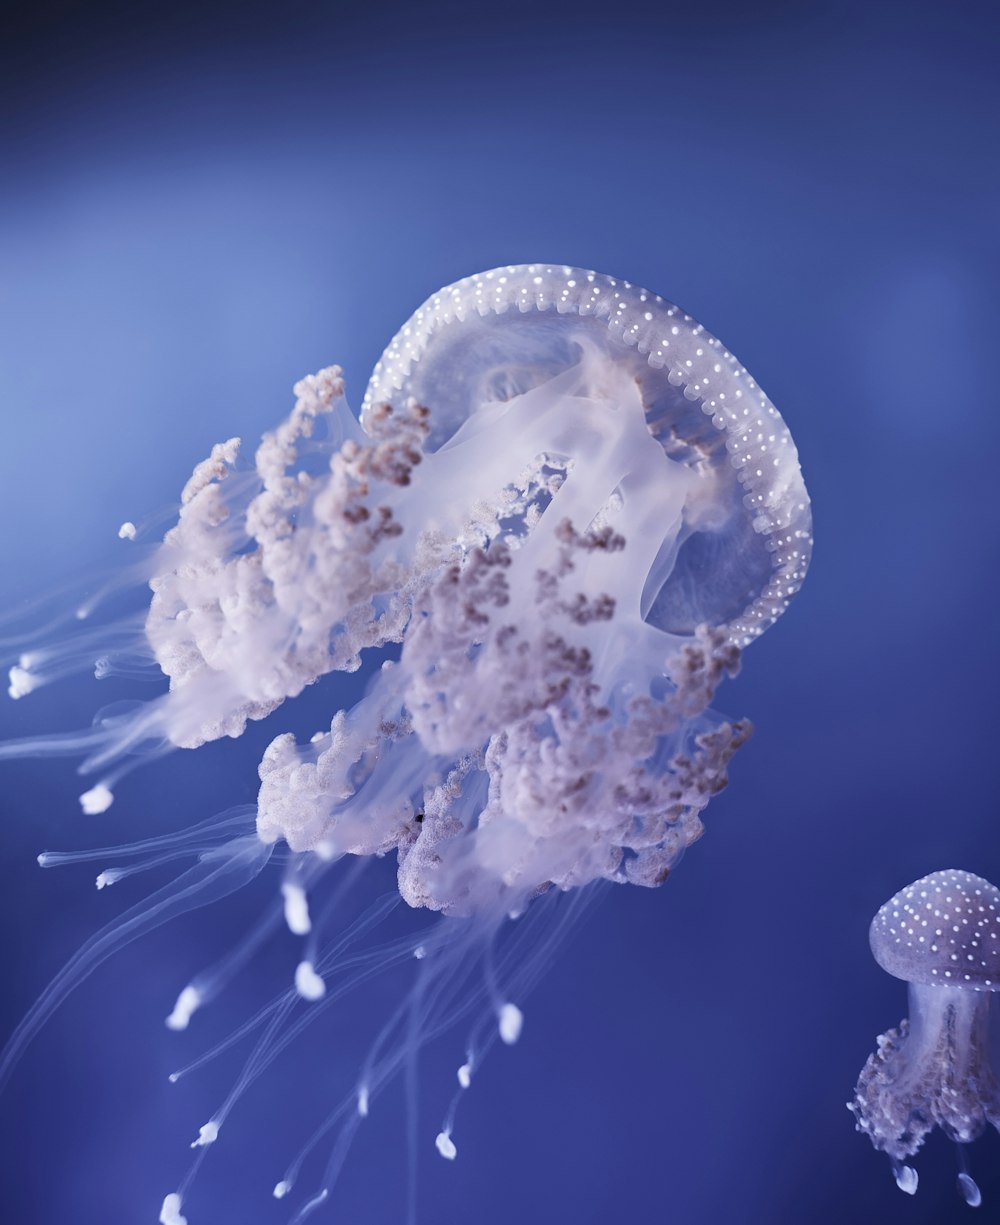 blue and white jellyfish in close up photography